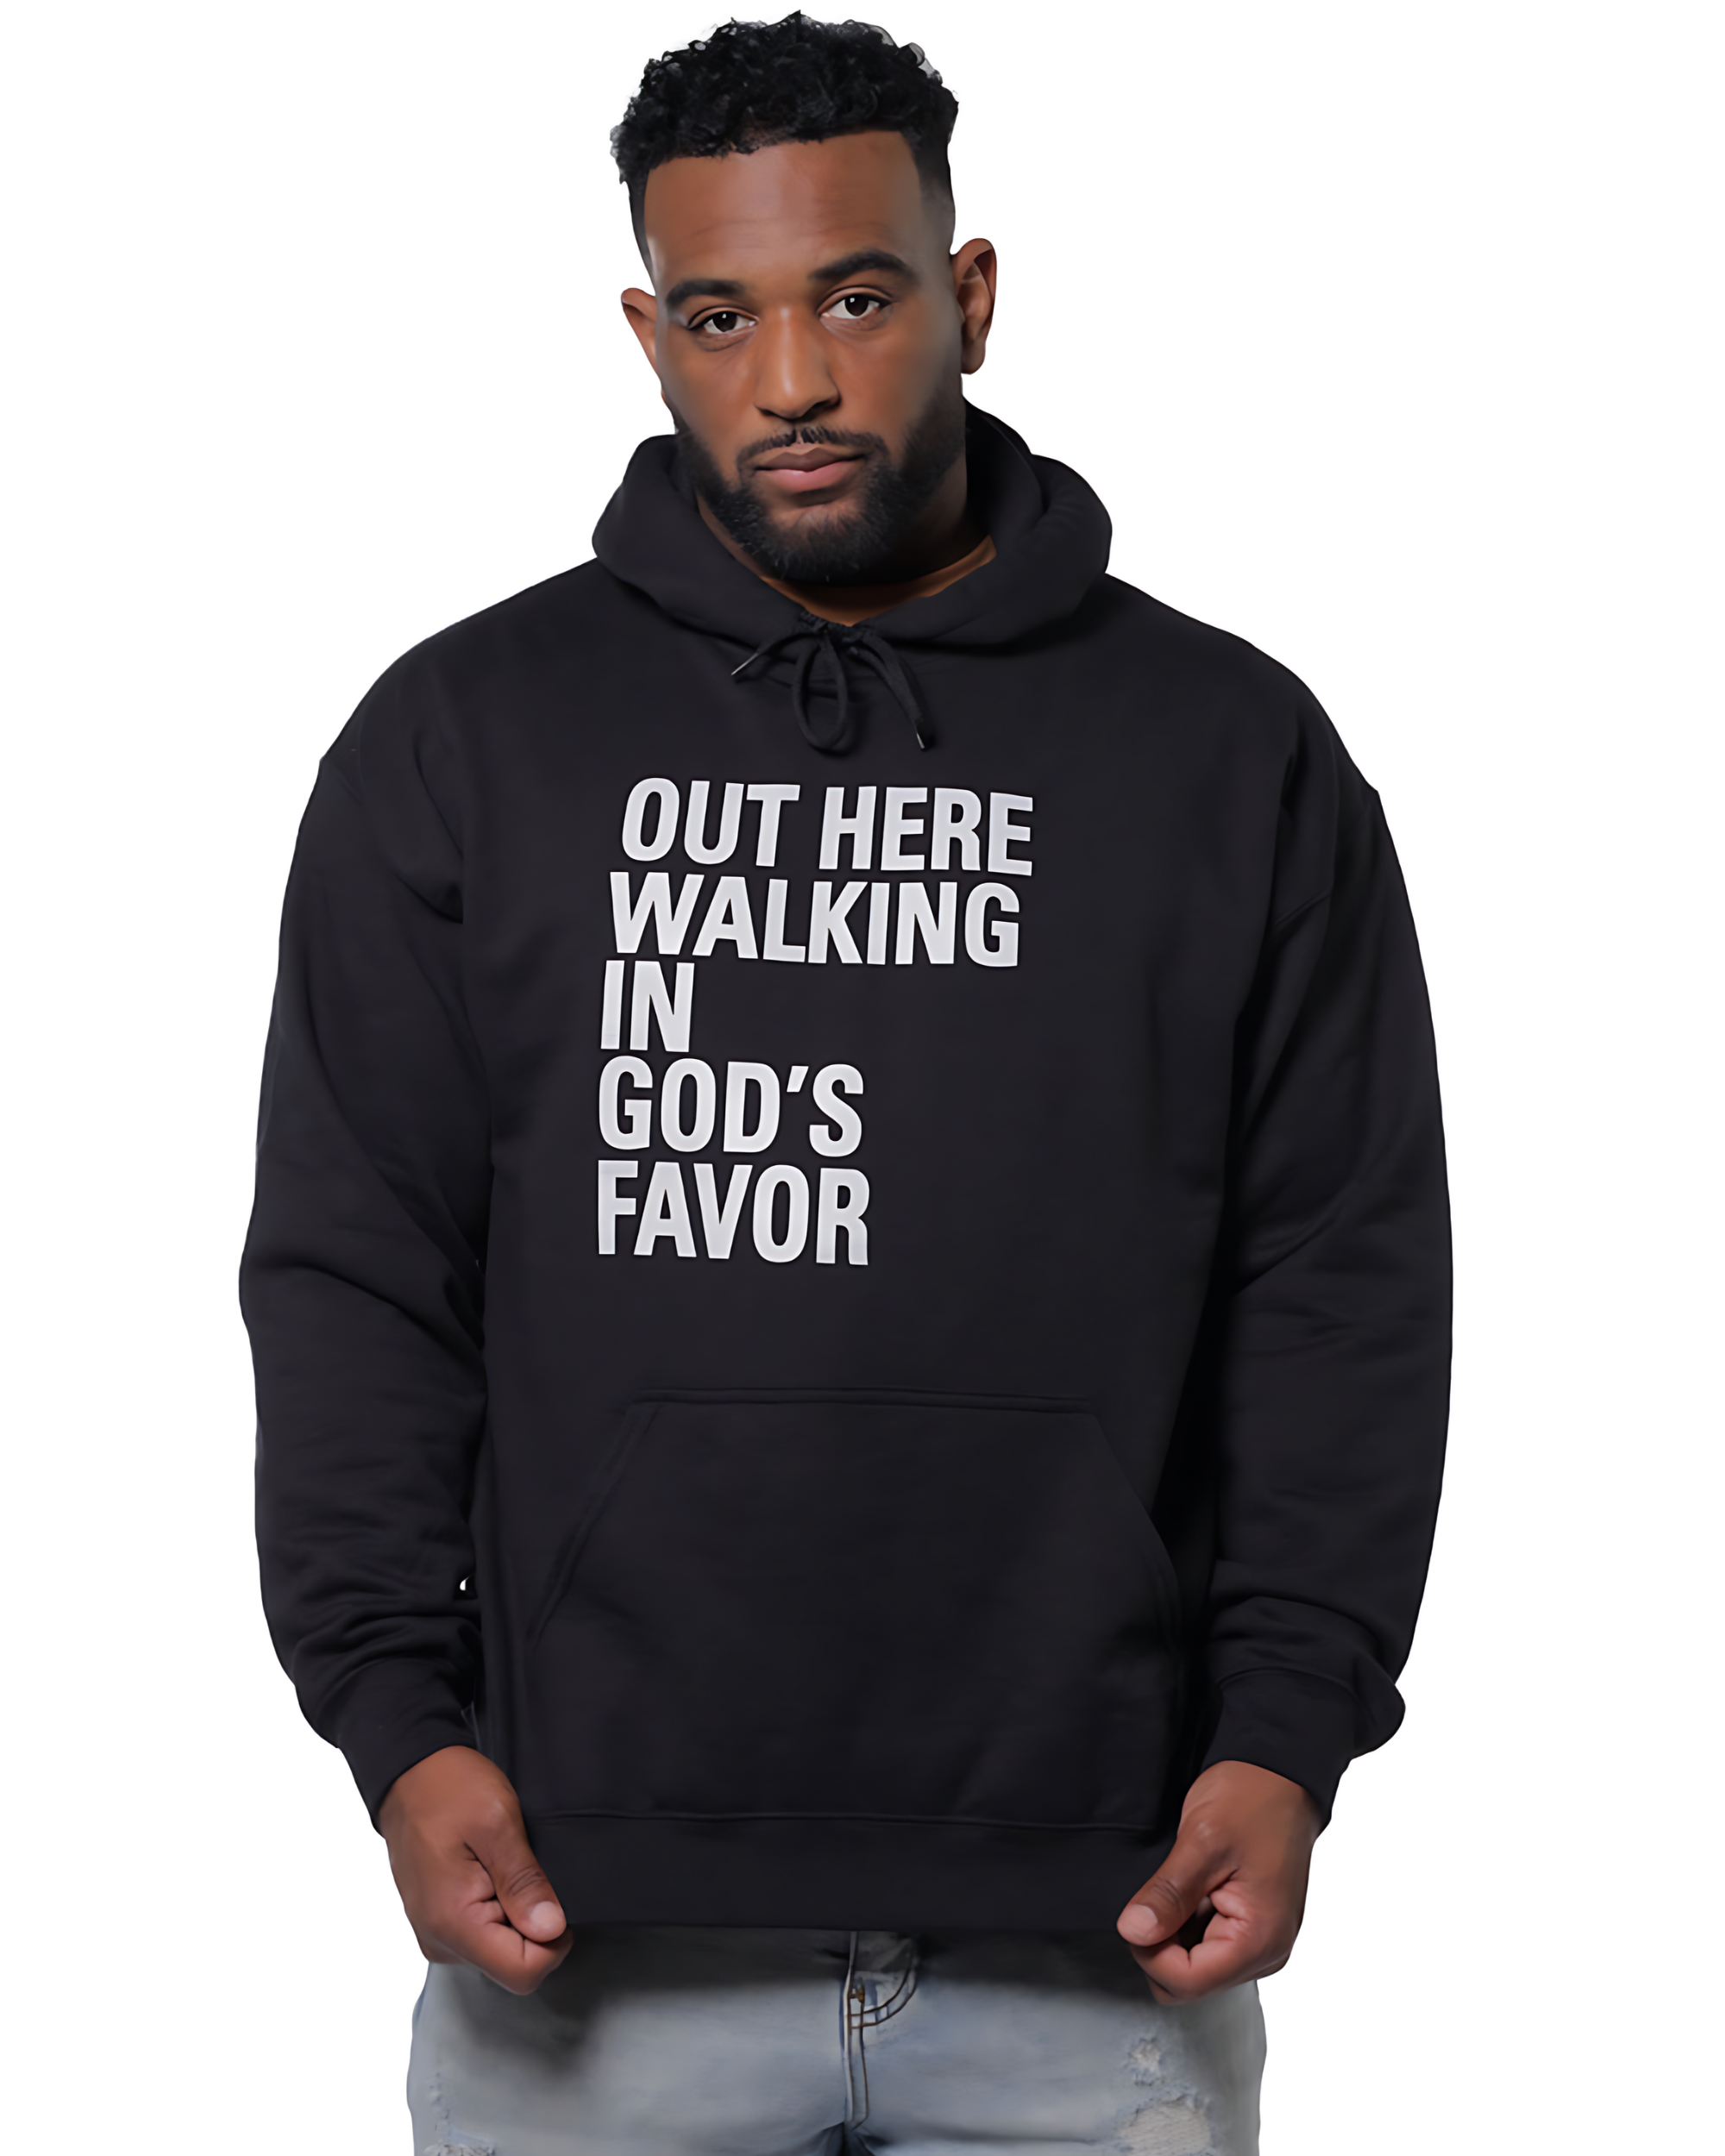 Walking In God's Favor, God's Favor, Walking in God's Hoodie, God's Favor Hoodie, Used By God, Used By God Clothing, Christian Apparel, Christian T-Shirts, Christian Shirts, christian t shirts for women, Men's Christian T-Shirt, Christian Clothing, God Shirts, christian clothing t shirts, Christian Sweatshirts, womens christian t shirts, t-shirts about jesus, God Clothing, Jesus Hoodie, Jesus Clothes, God Is Dope, Art Of Homage, Red Letter Clothing, Elevated Faith, Beacon Threads, God The Father Apparel